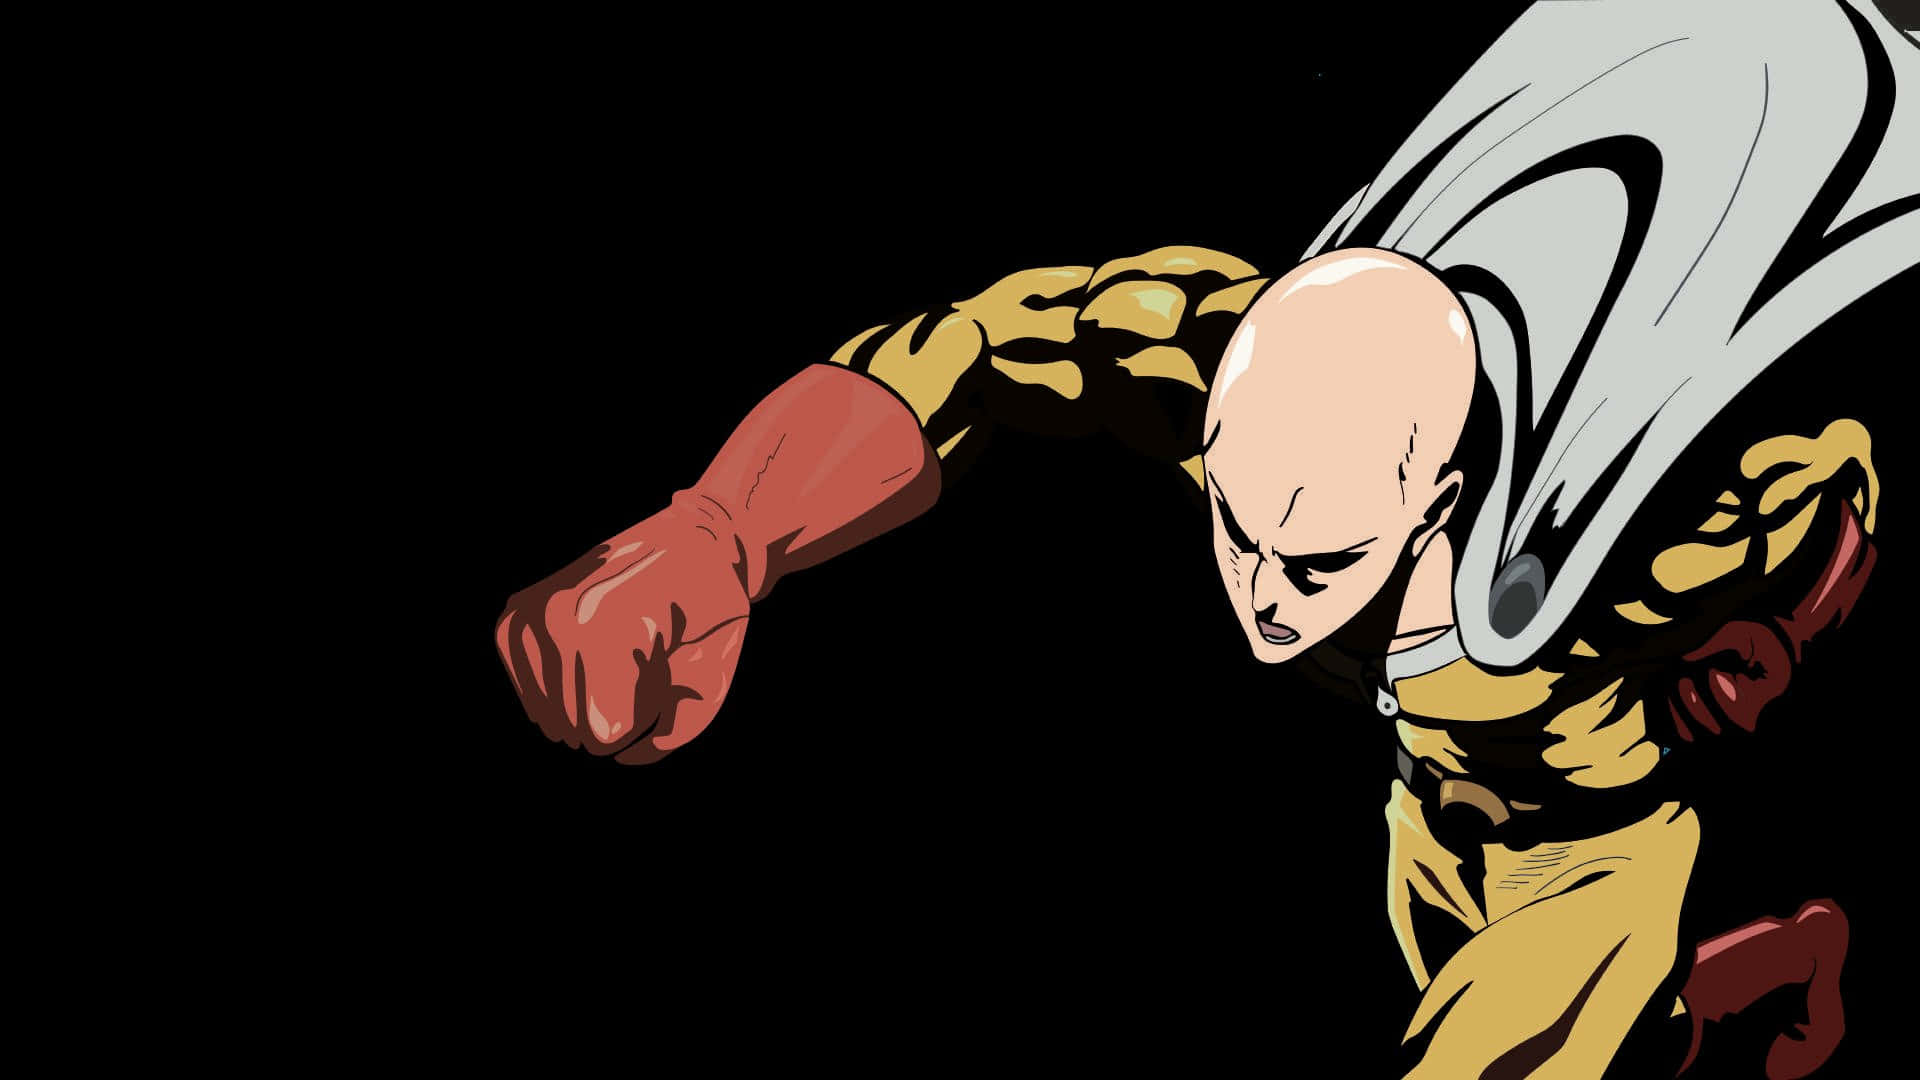 One-Punch Man battles evil forces with a single punch